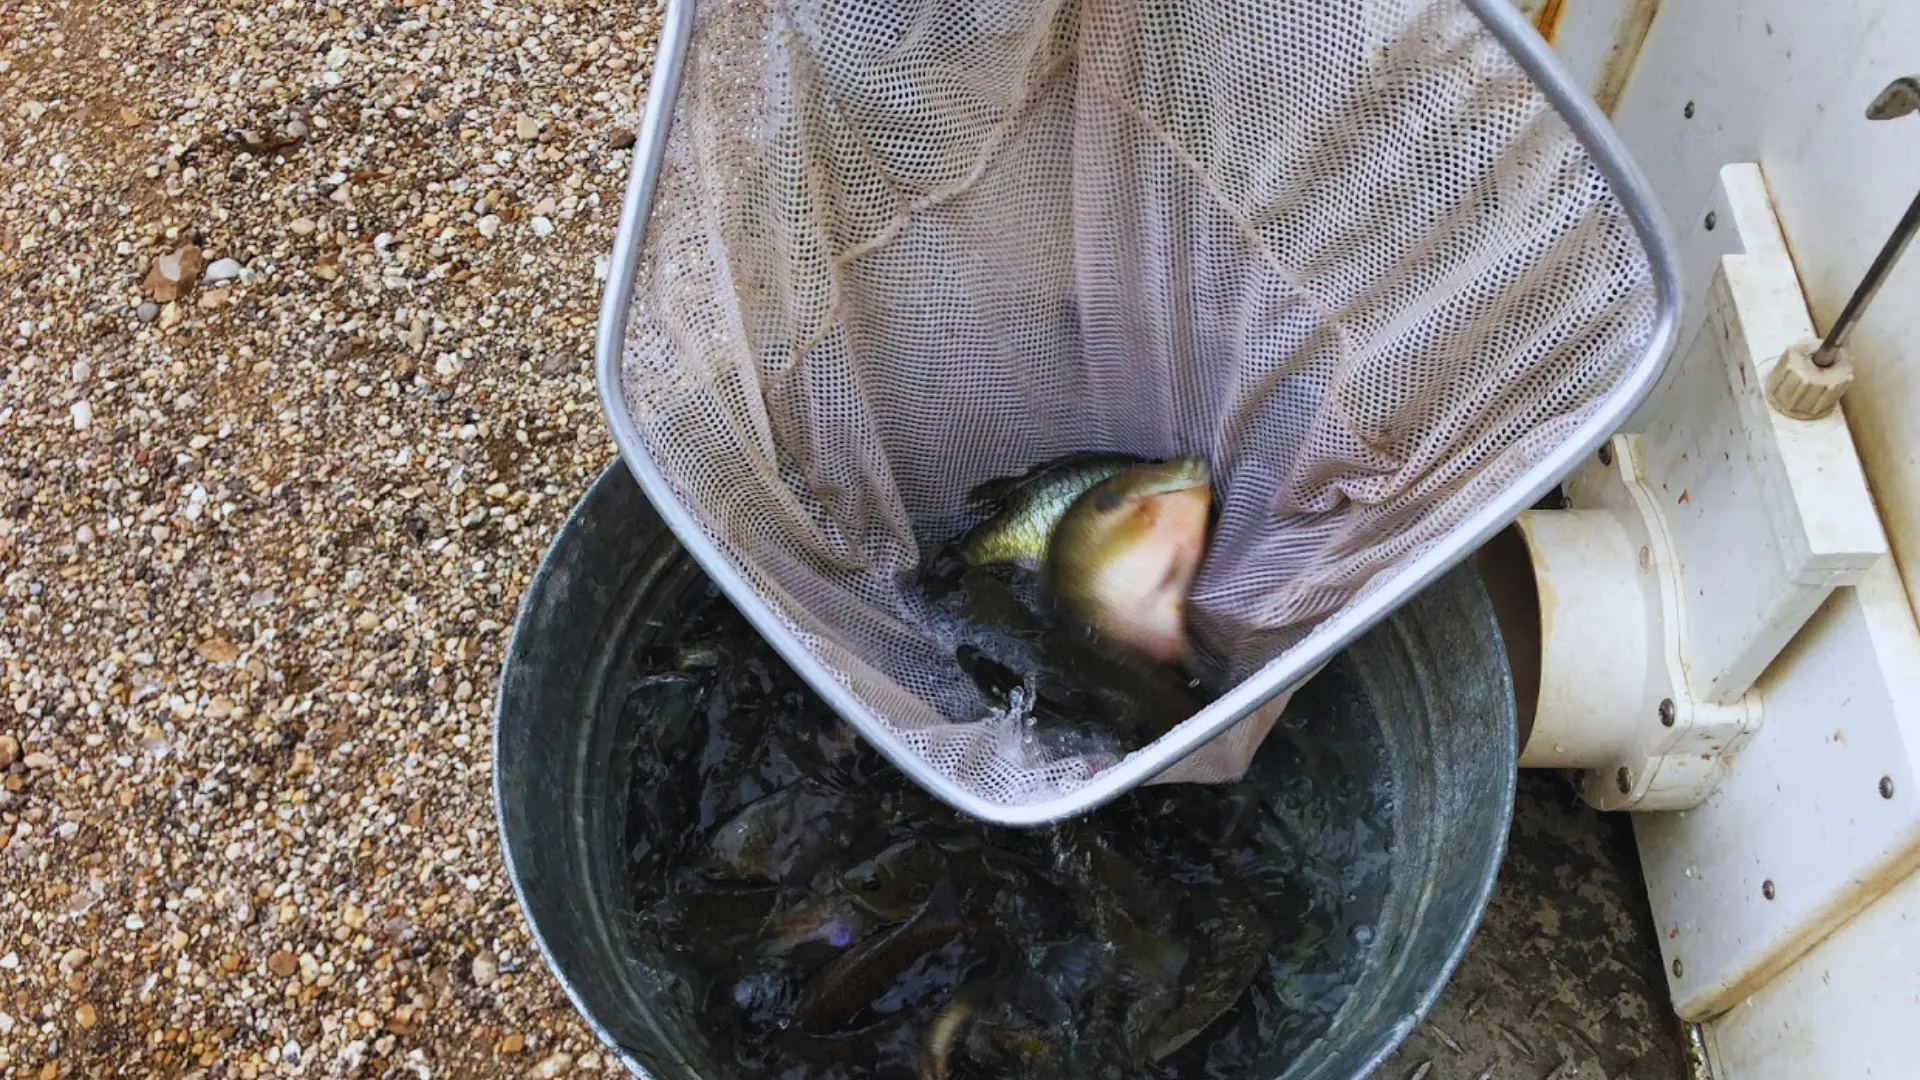 Large bluegill being dipped into hauling tub